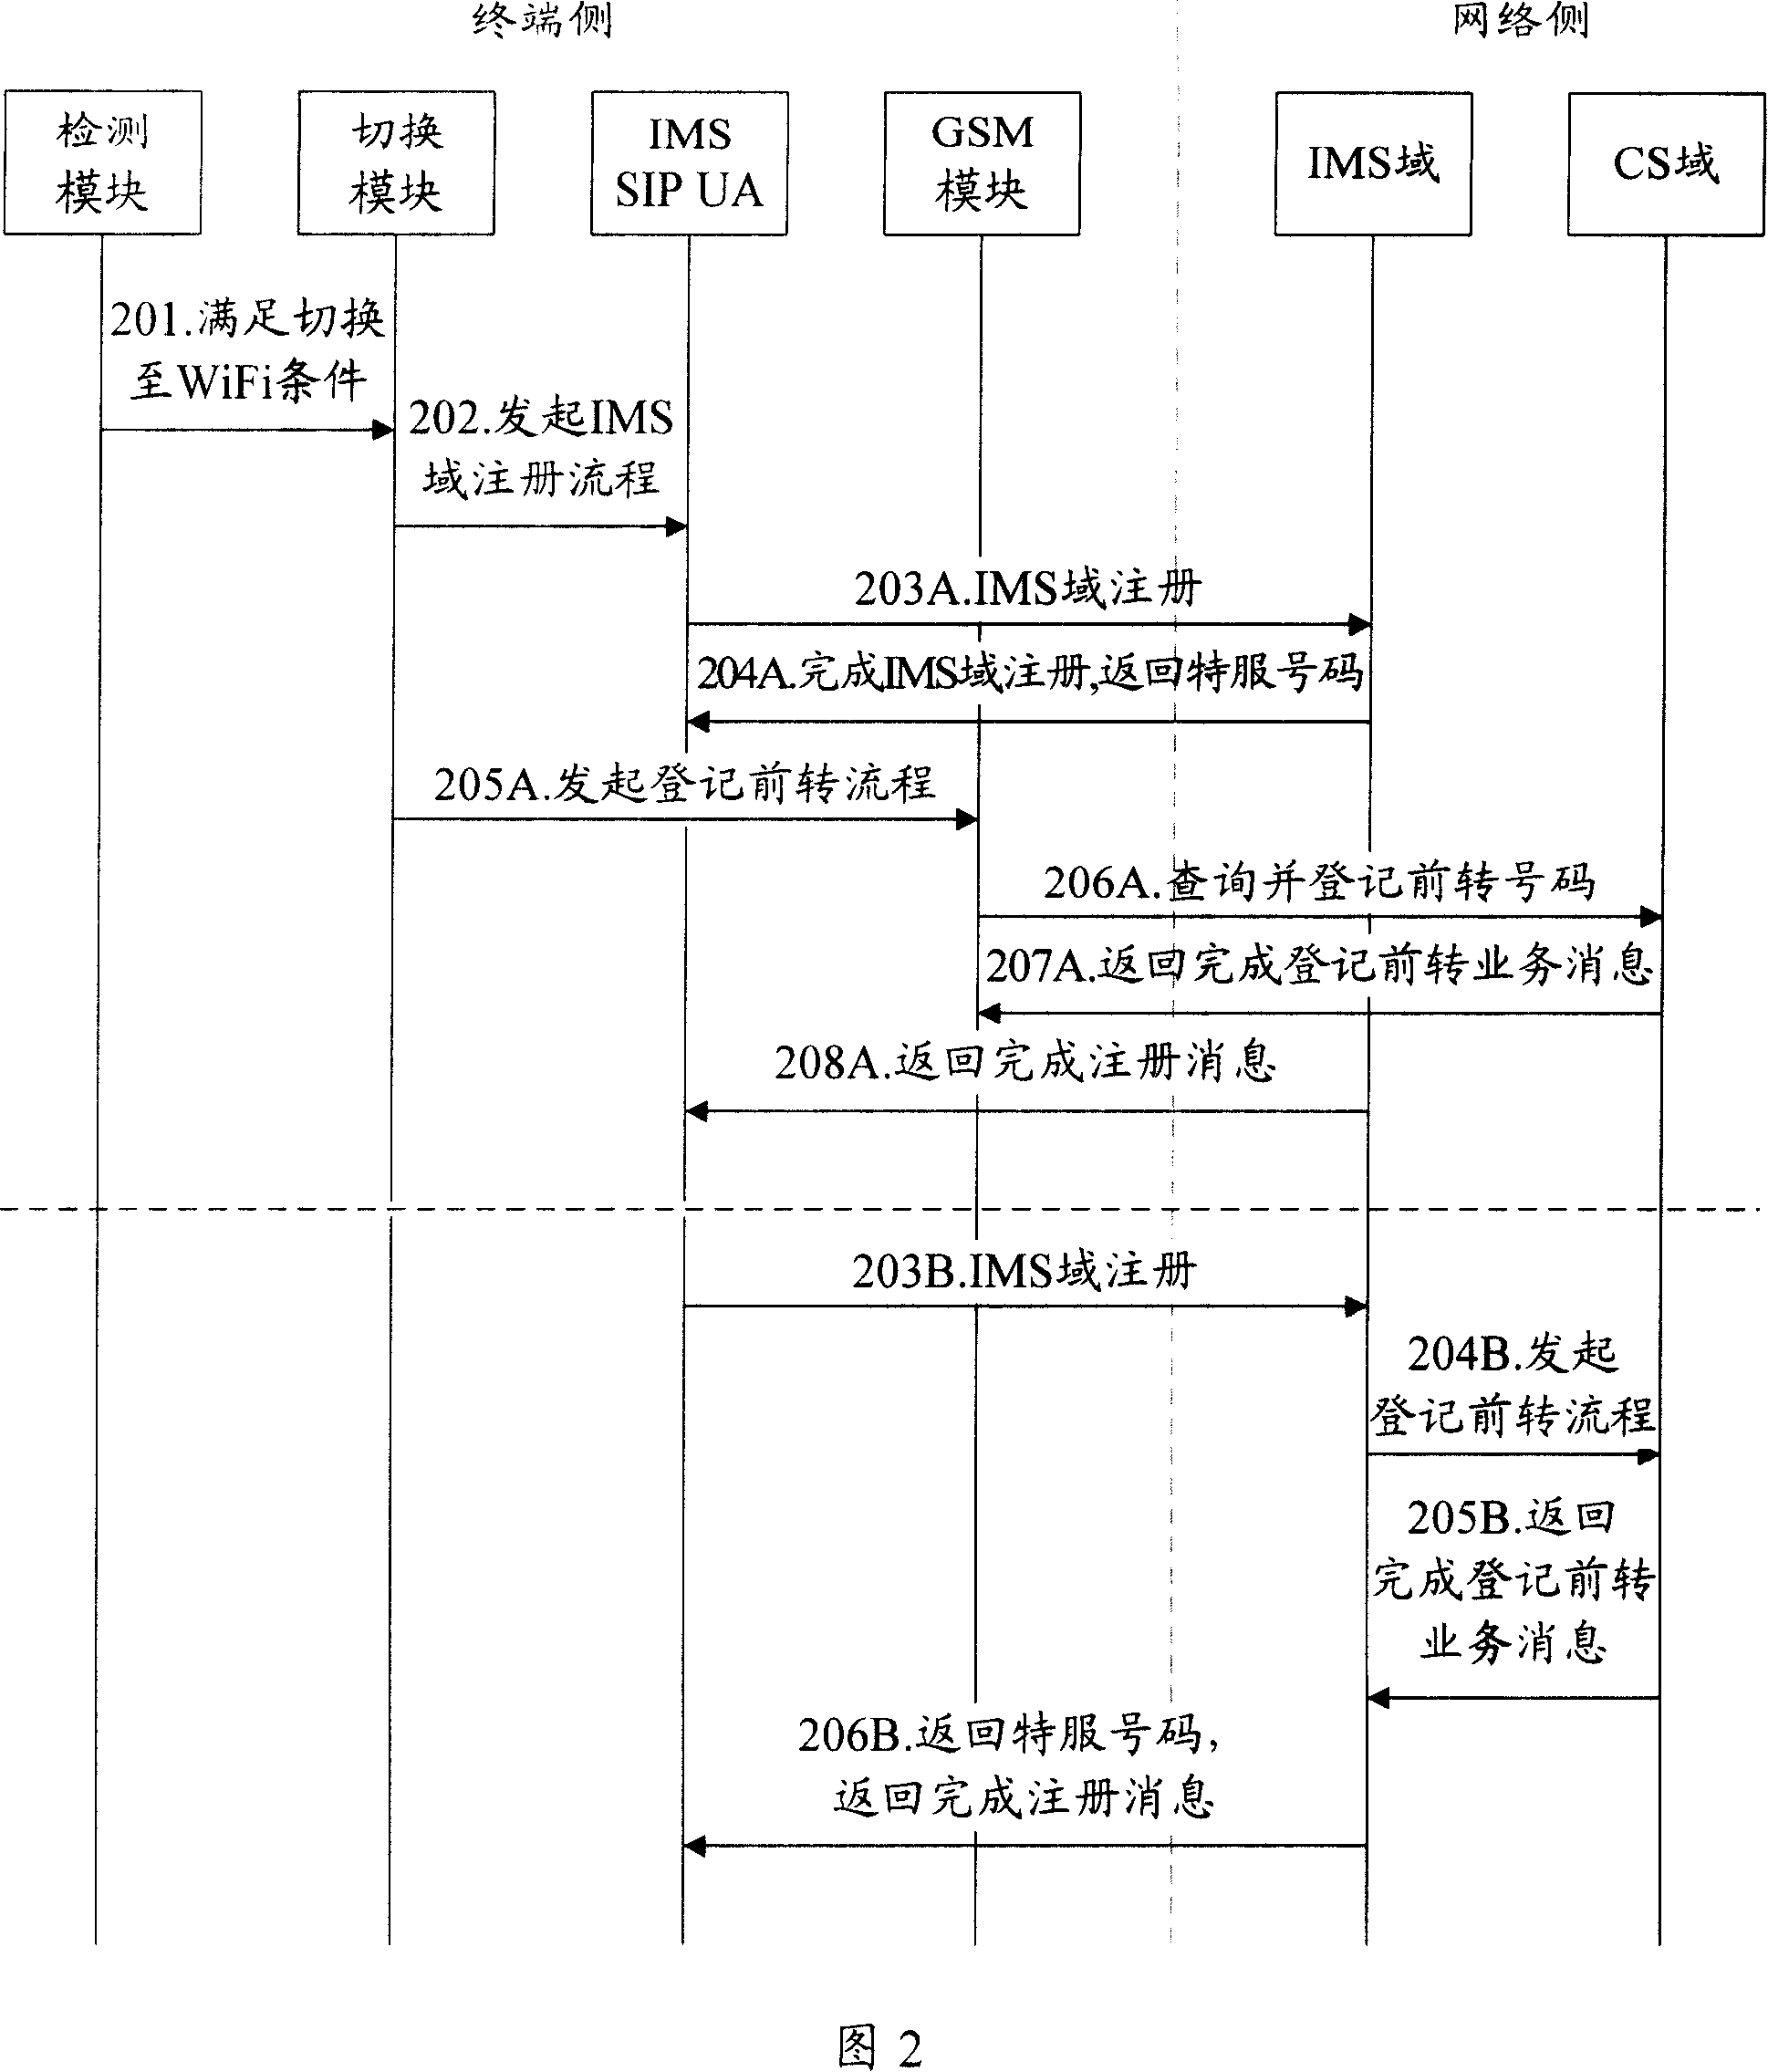 Terminal and method for realizing seamless switching among different communication network